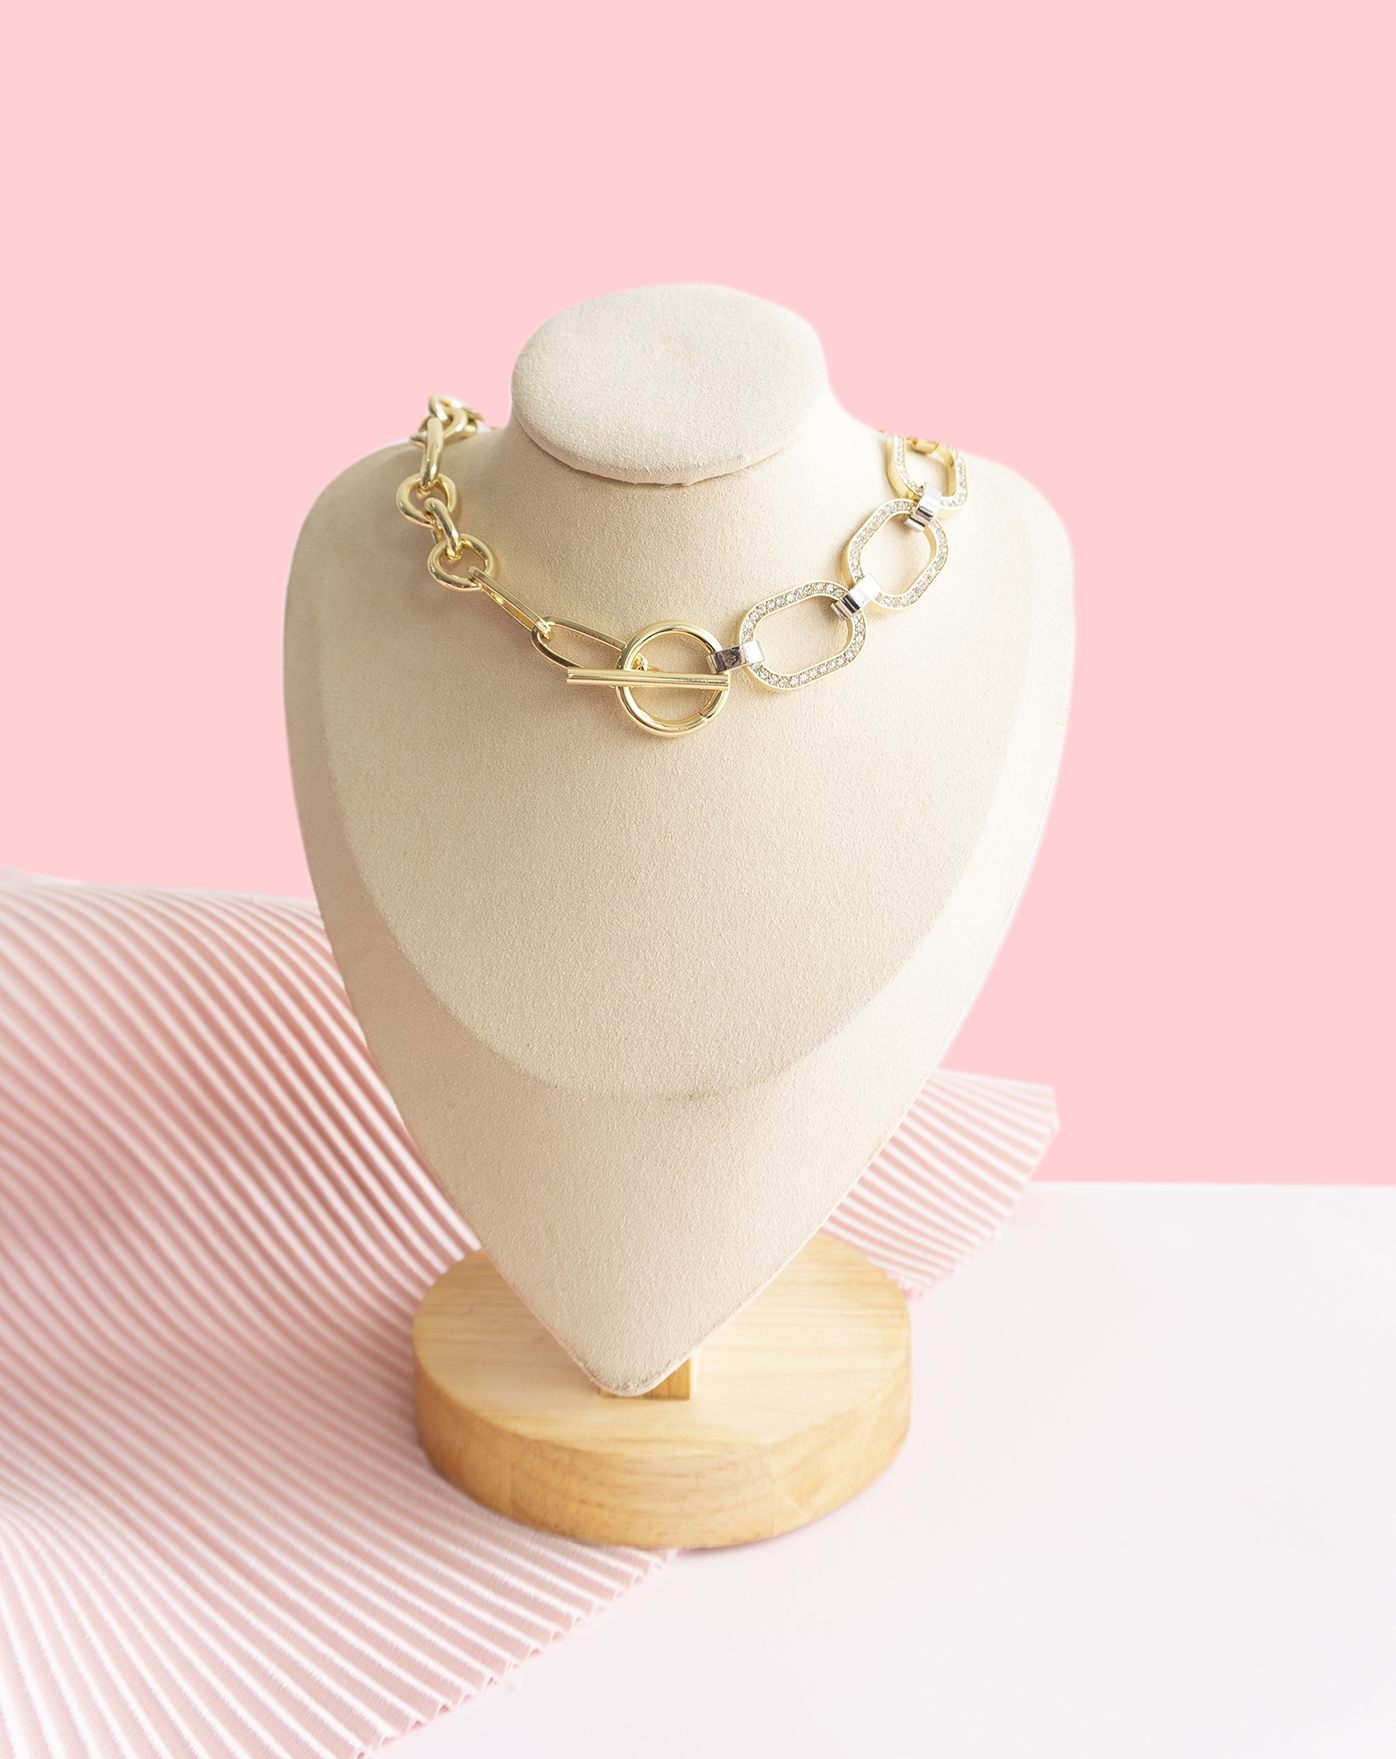 The Gold Bling Chian Necklace